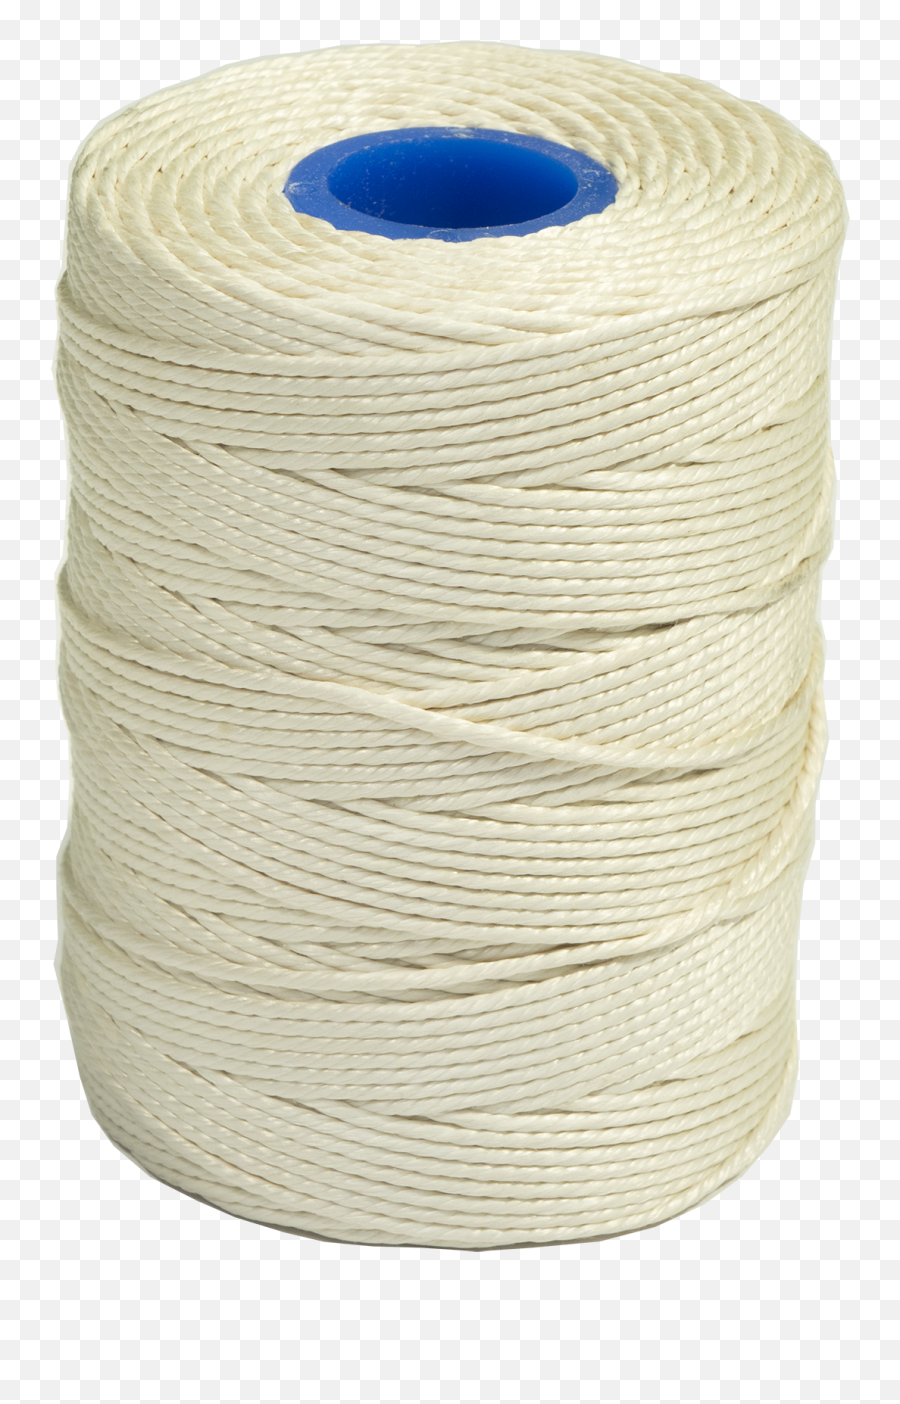 Download 1 Roll Rayon Twine No5 - Thread Png,Twine Png